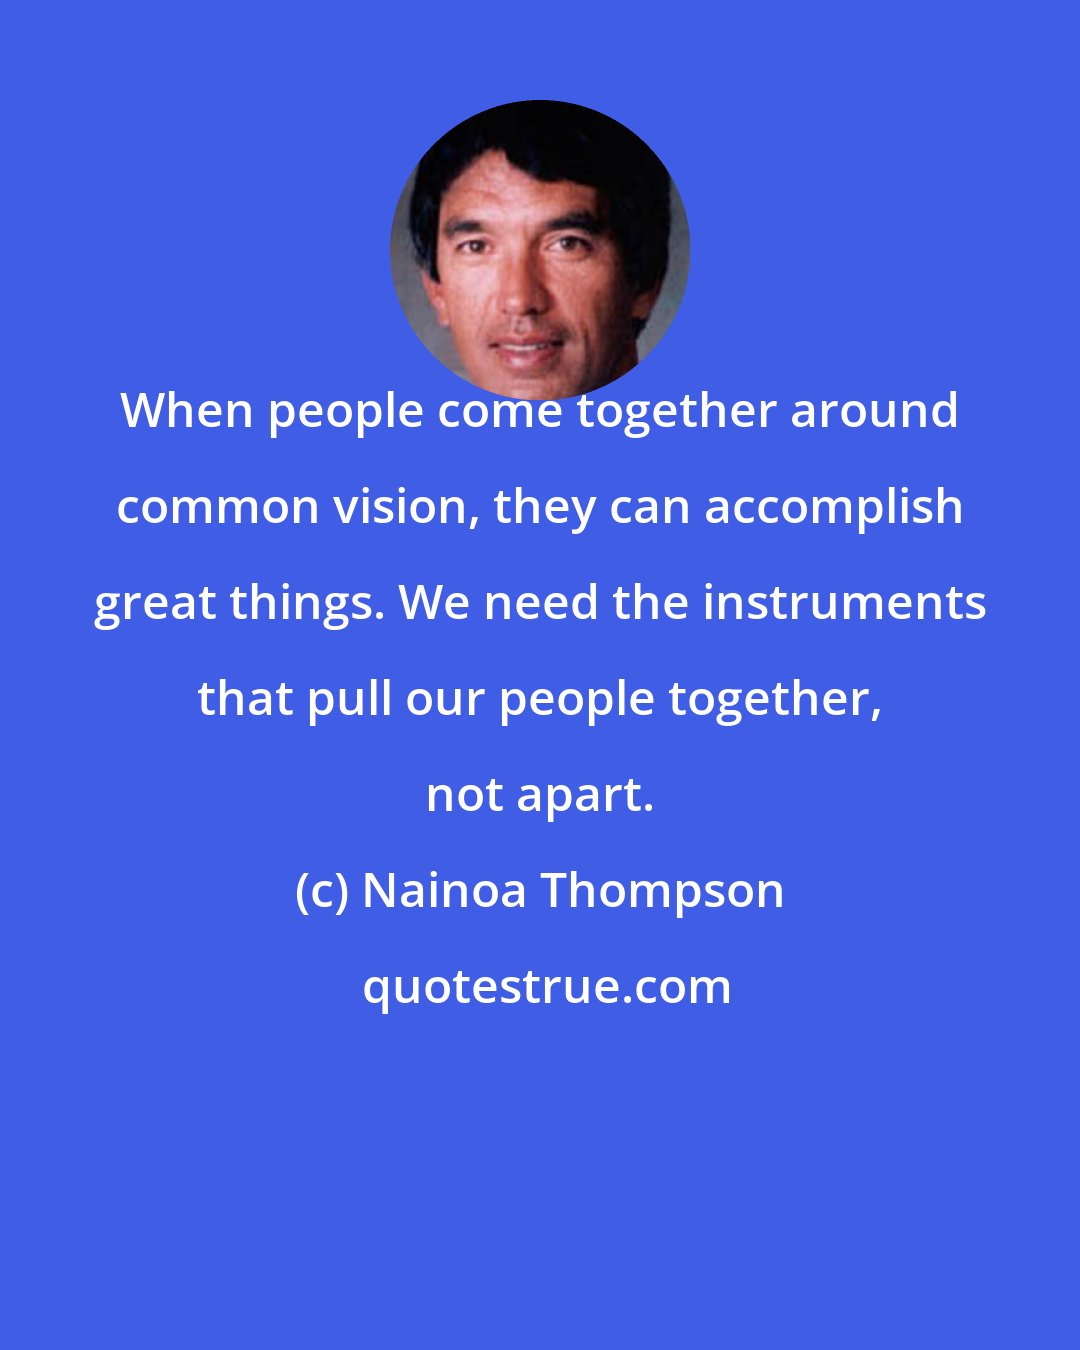 Nainoa Thompson: When people come together around common vision, they can accomplish great things. We need the instruments that pull our people together, not apart.